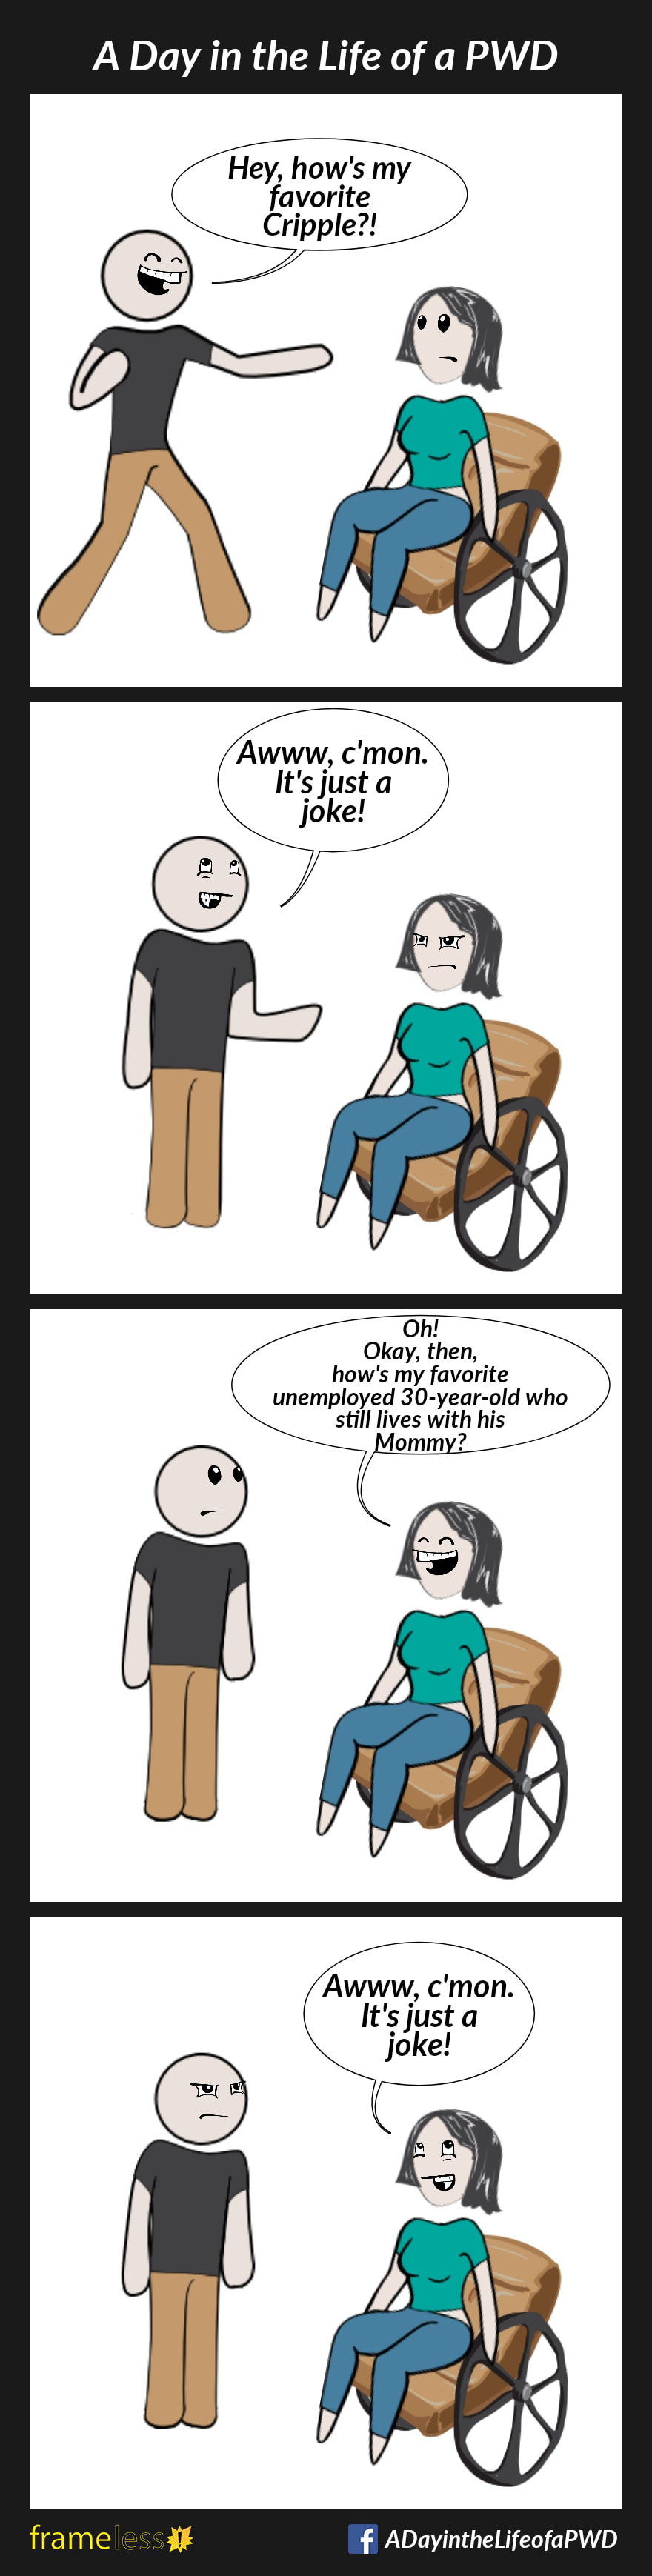 COMIC STRIP 
A Day in the Life of a PWD (Person With a Disability) 

Frame 1:
A woman in a wheelchair is approached by a man. 
MAN (grinning): Hey, how's my favorite Cripple?!

Frame 2:
The woman is offended. 
MAN: Awww, c'mon. It's just a joke!

Frame 3:
WOMAN (grinning): Oh! Okay then, how's my favorite unemployed 30-year-old who still lives with his Mommy?

Frame 4:
The man is offended. 
WOMAN: Awww, c'mon. It's just a joke!